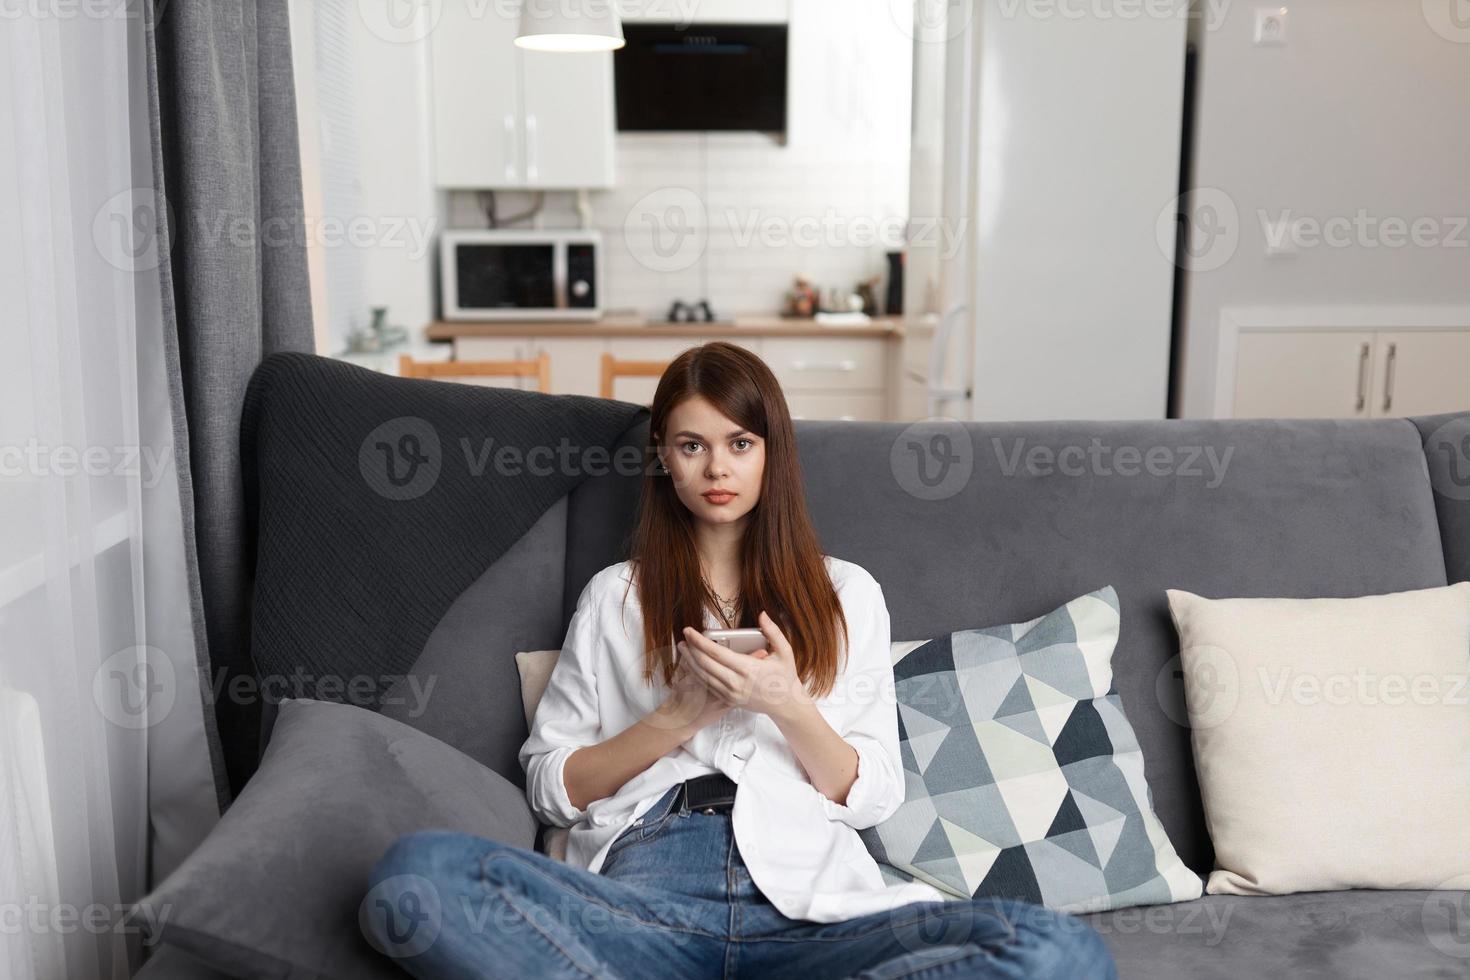 woman with a phone in her hands sitting on a comfortable sofa leisure weekend technology photo